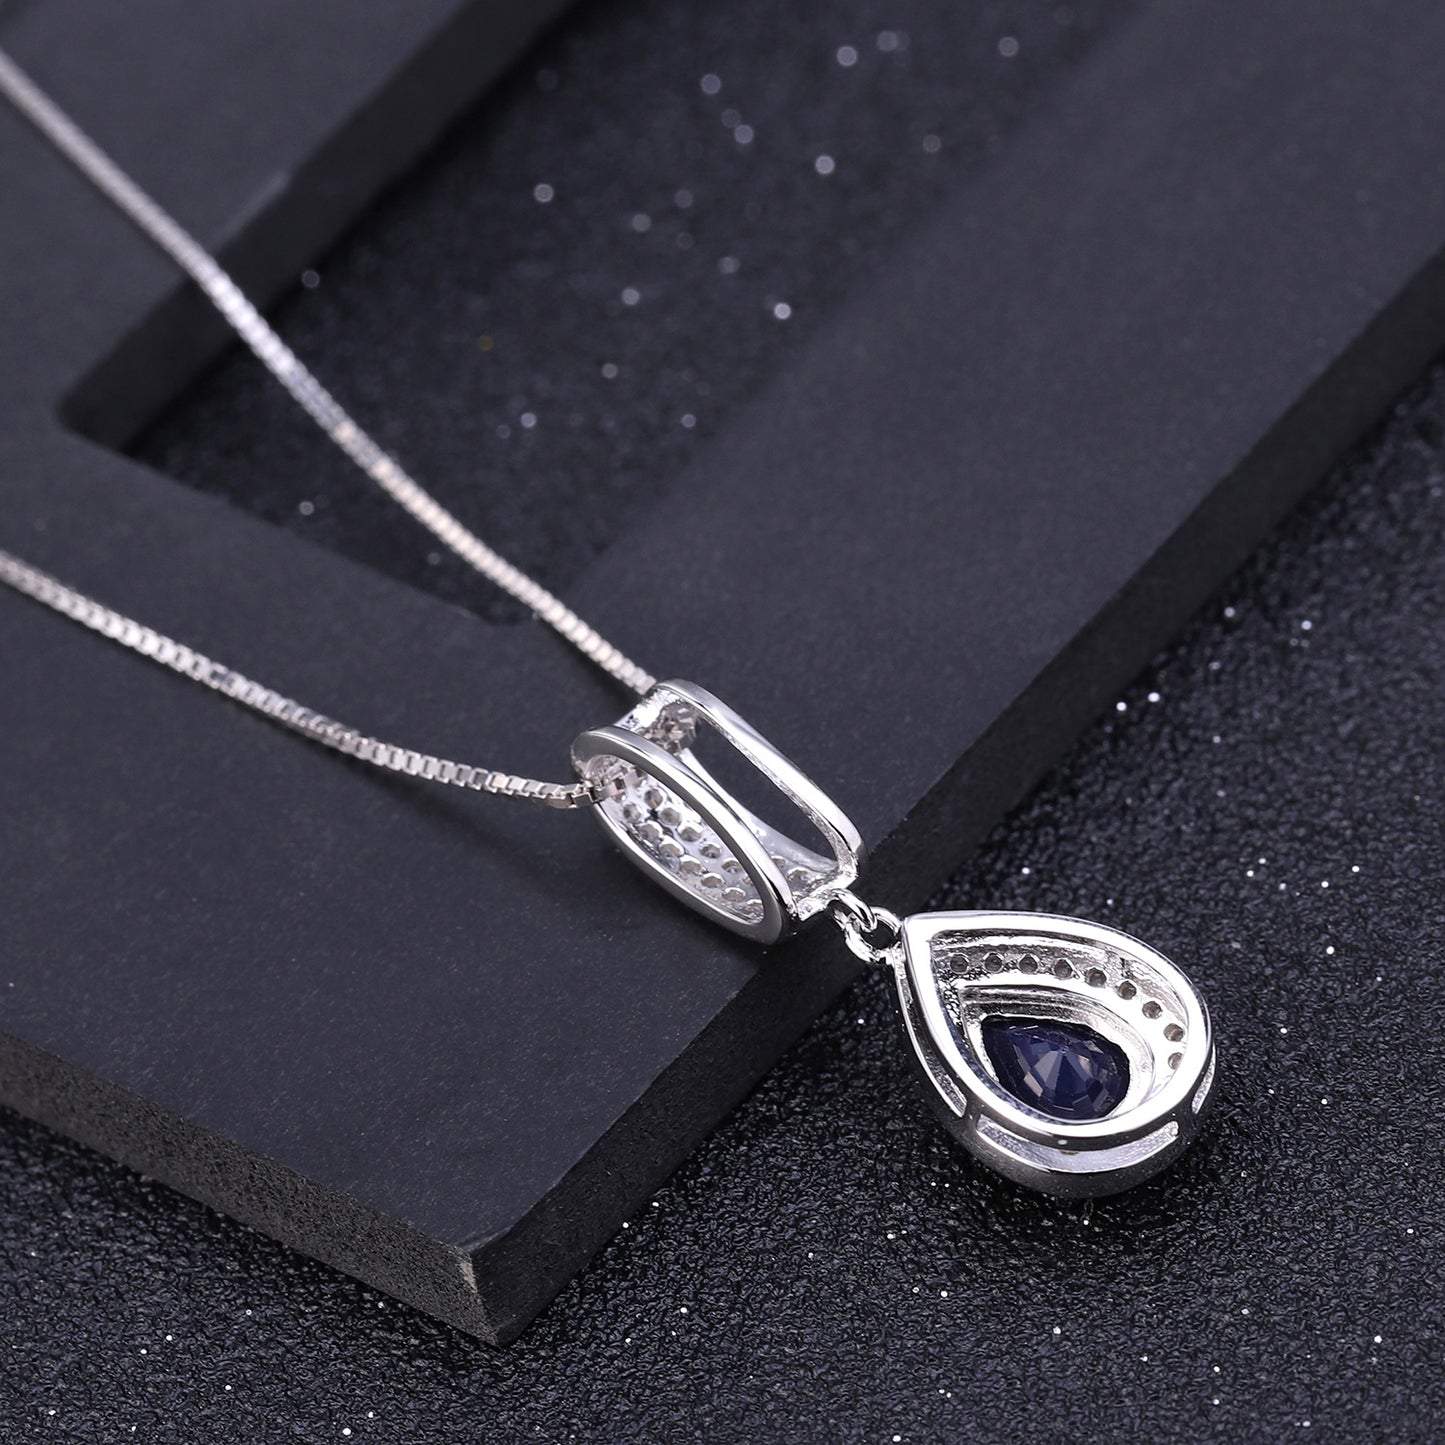 European Fashion Creative Style Inlaid Sapphire Soleste Halo Pear Drop Pendant Sterling Silver Necklace for Women